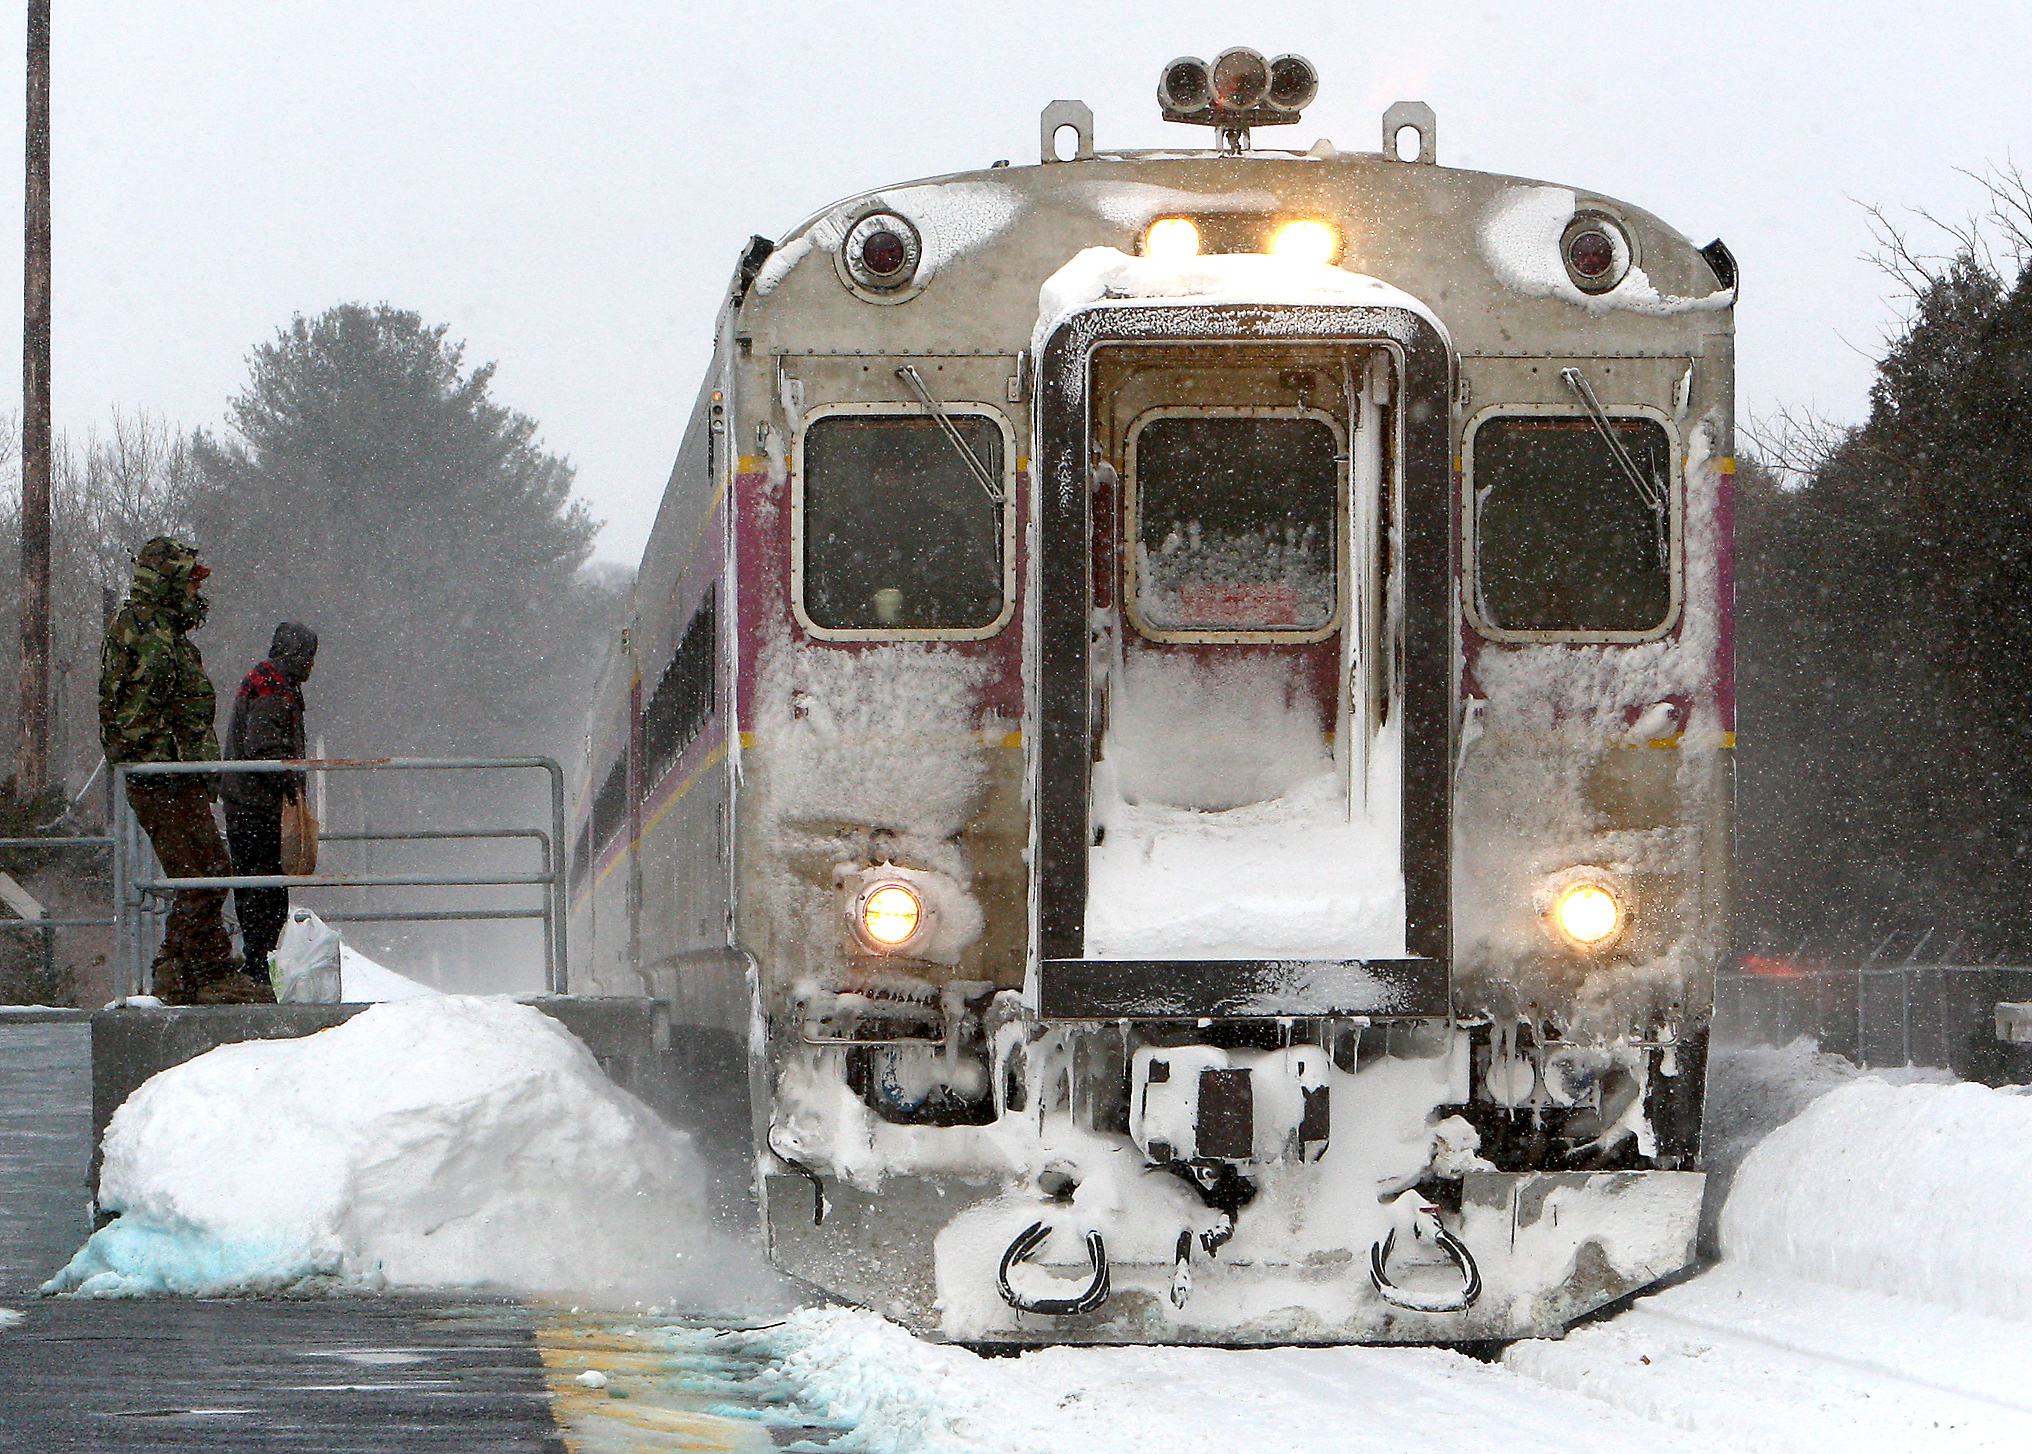 MBTA Offers Hope For Faster Recovery; Baker Blasts Keolis